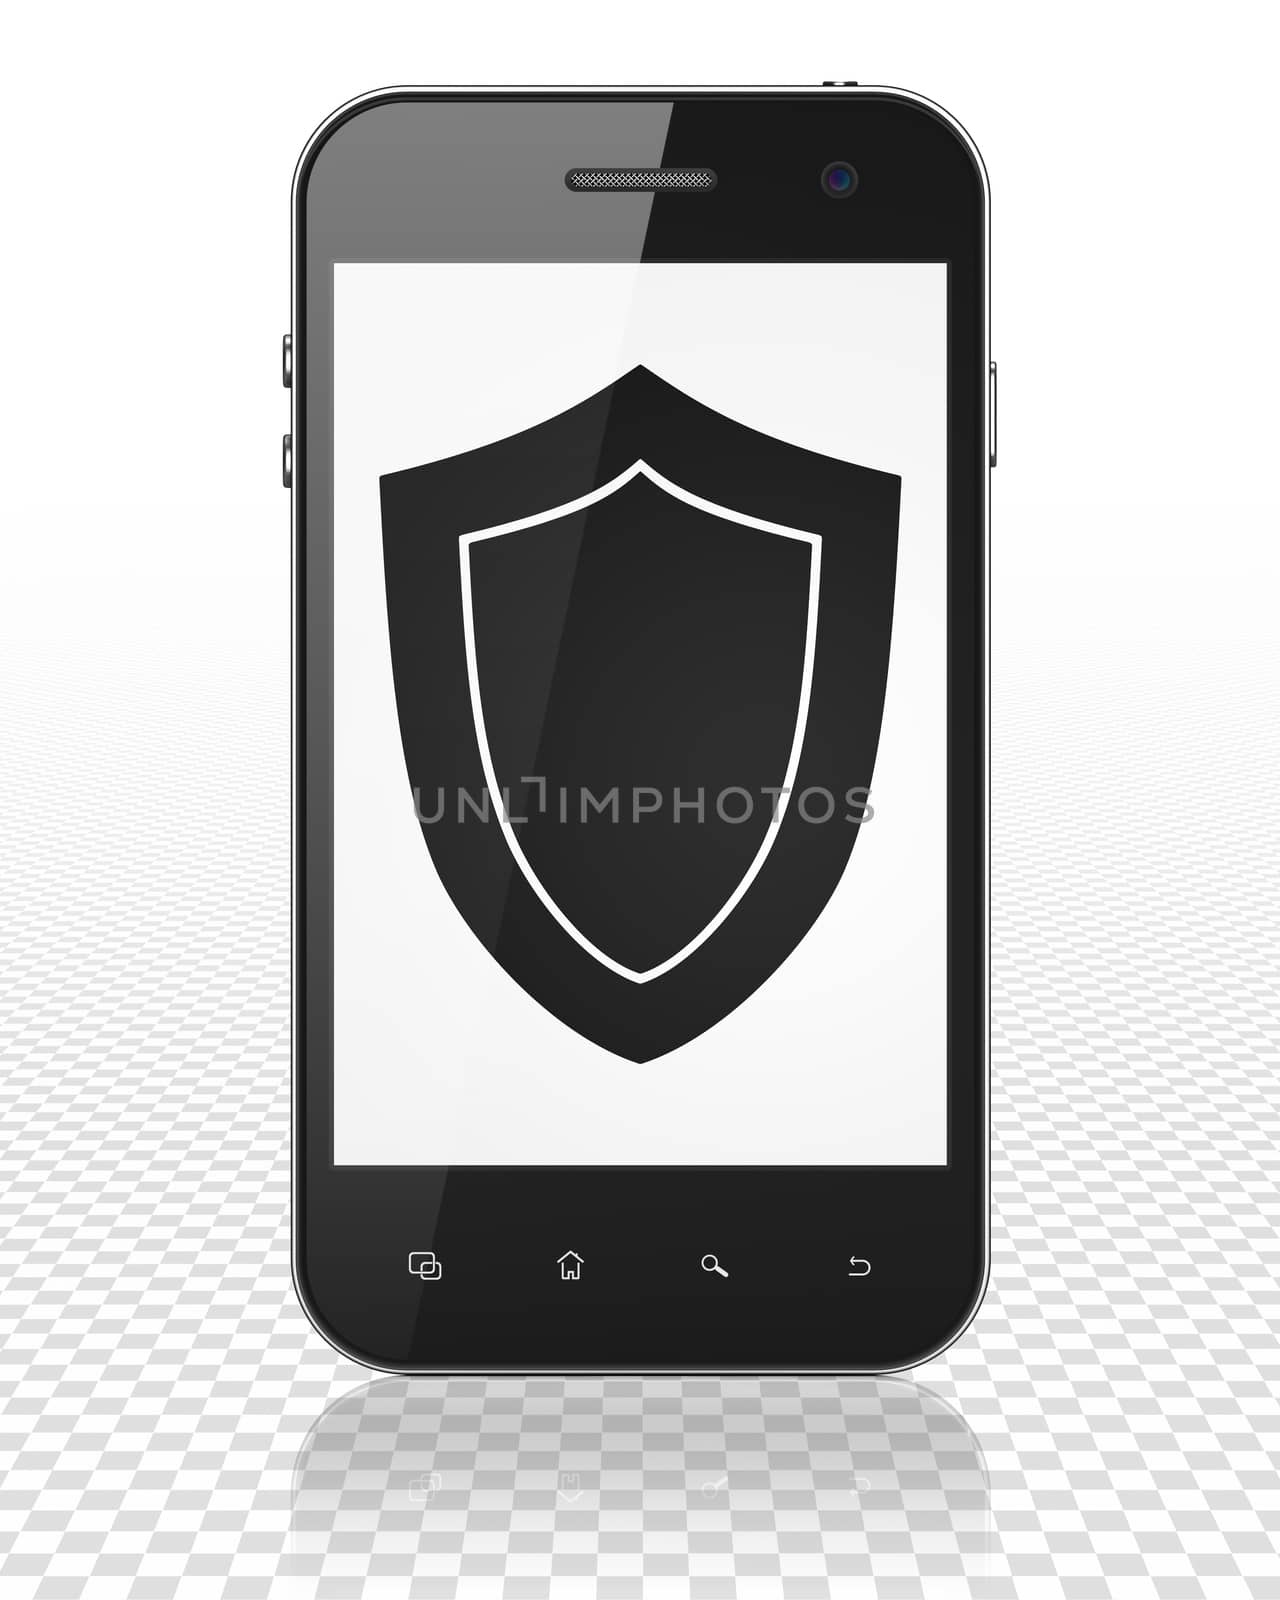 Privacy concept: Smartphone with black Shield icon on display, 3D rendering